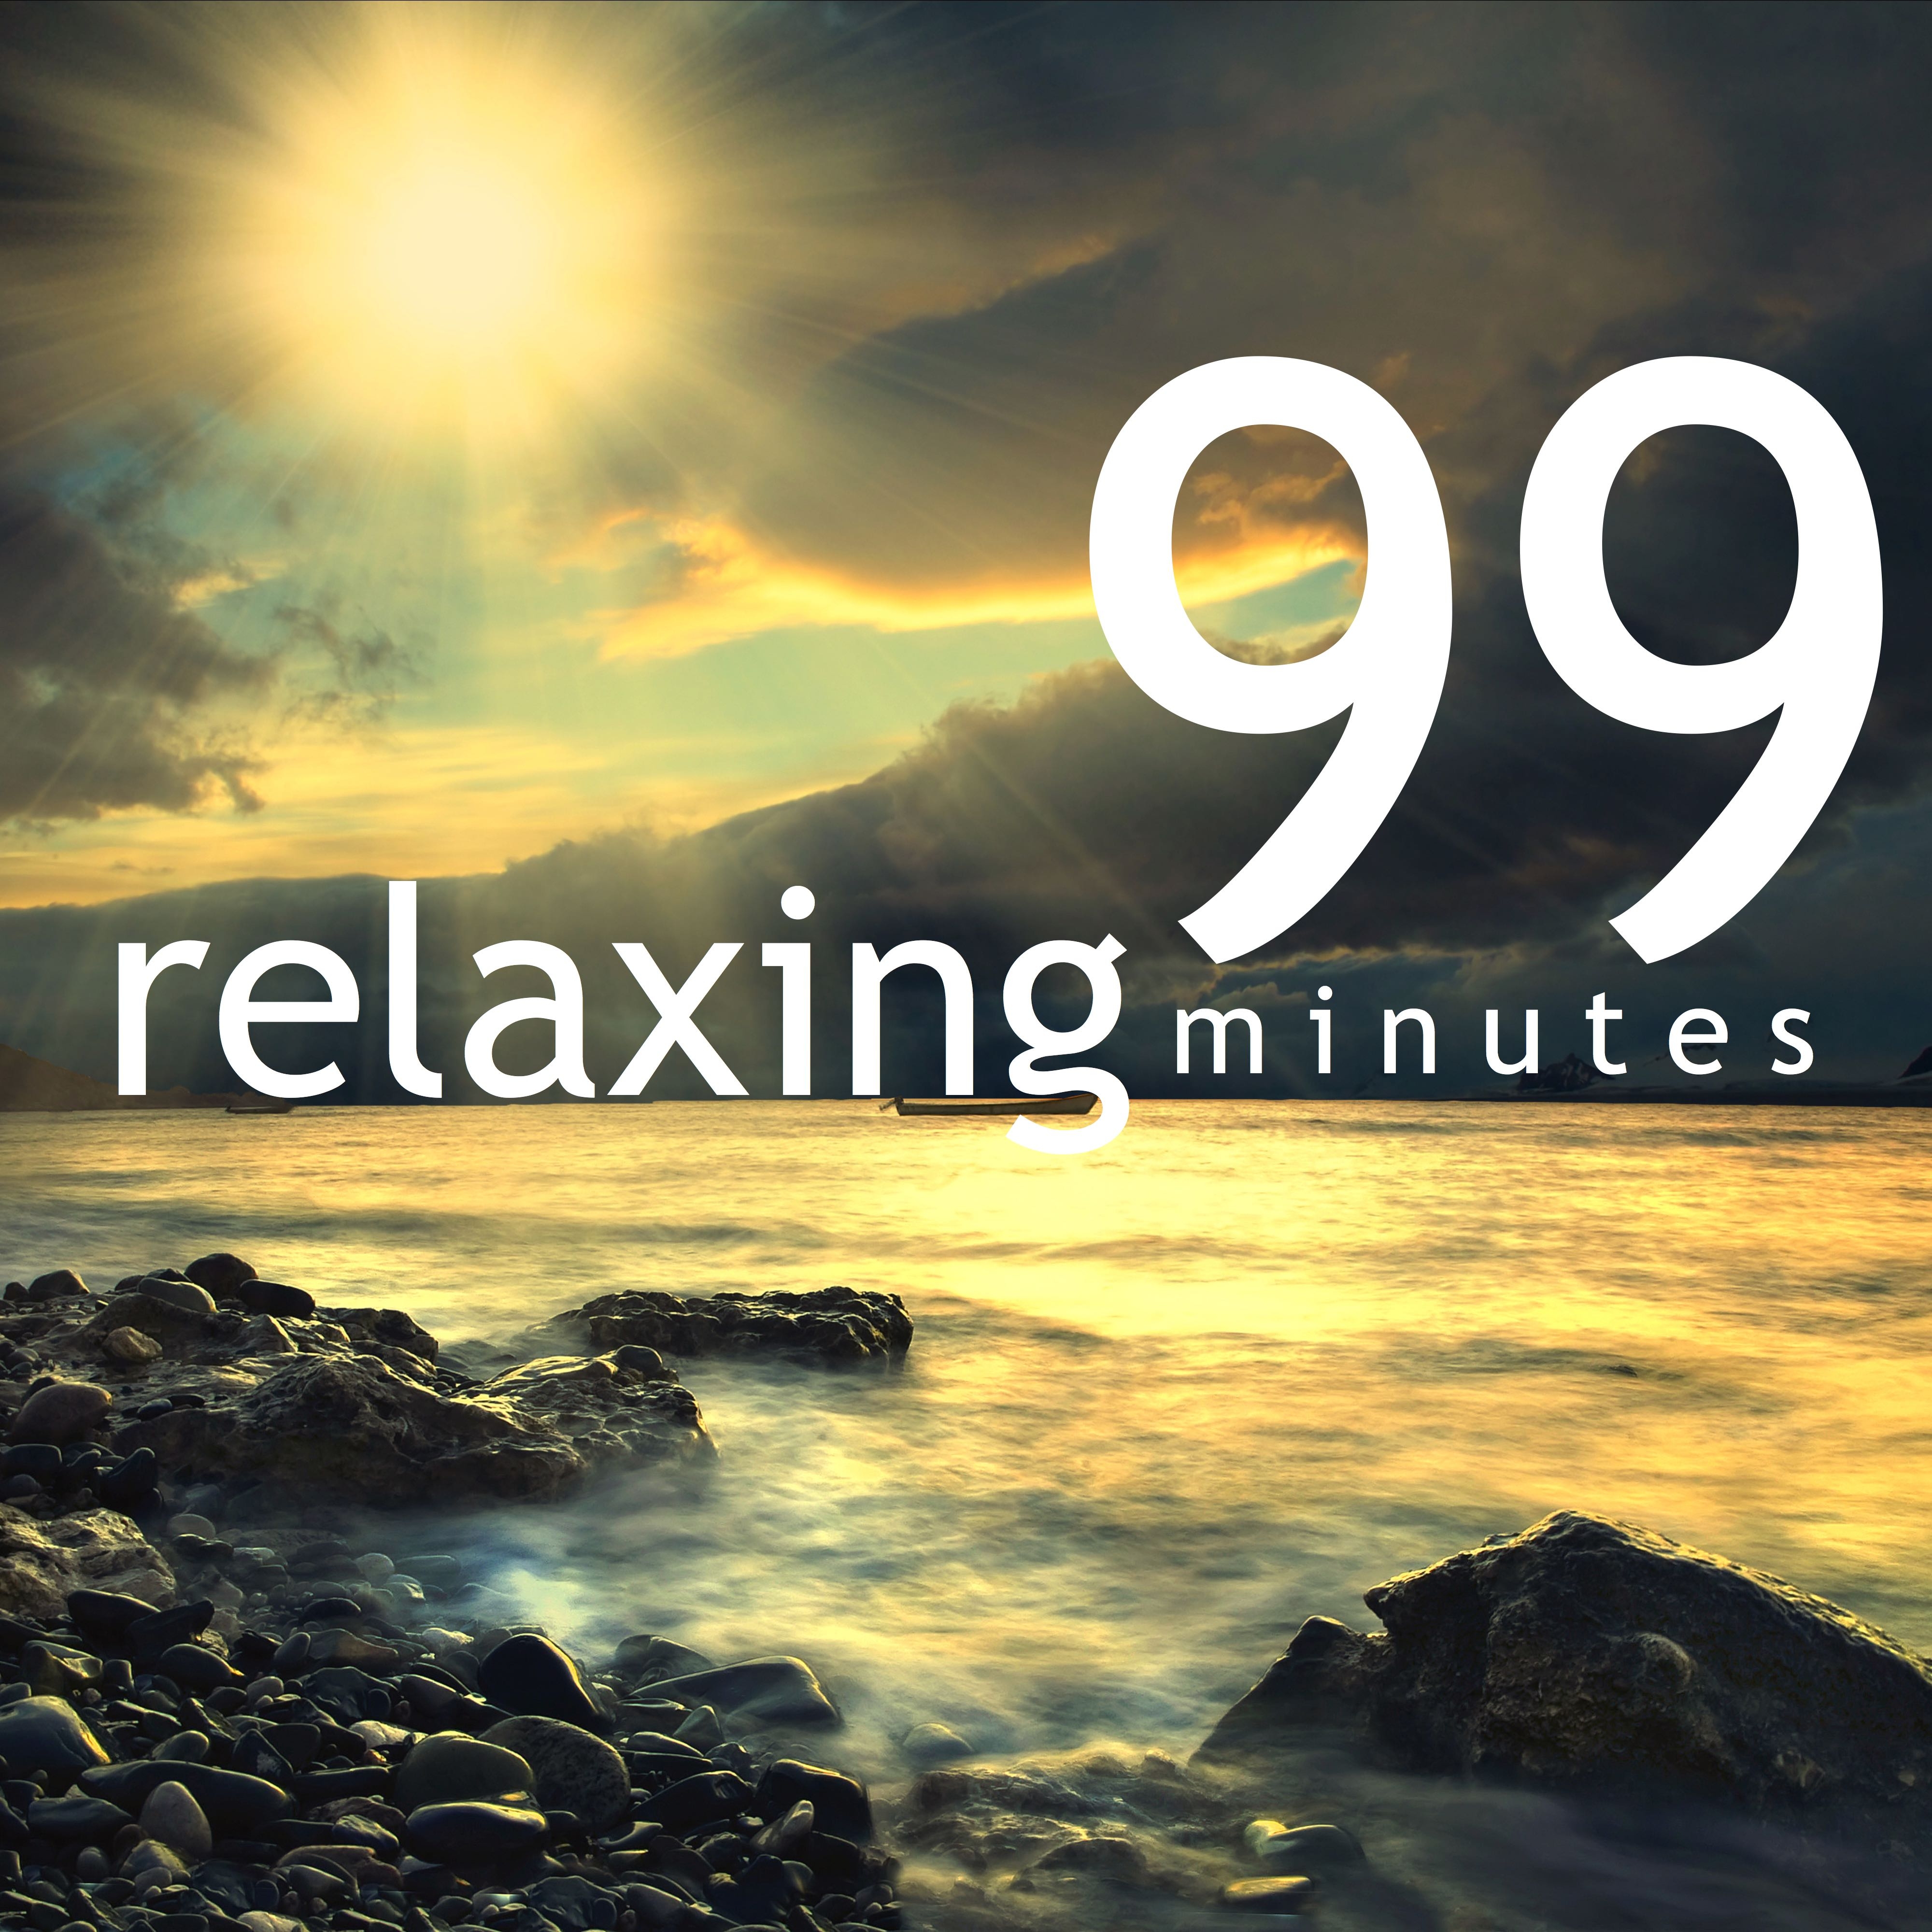 99 Relaxing Minutes  Ultimate Energy Healing Spa Music for Relaxation and Massage Therapy, Reiki  Yoga